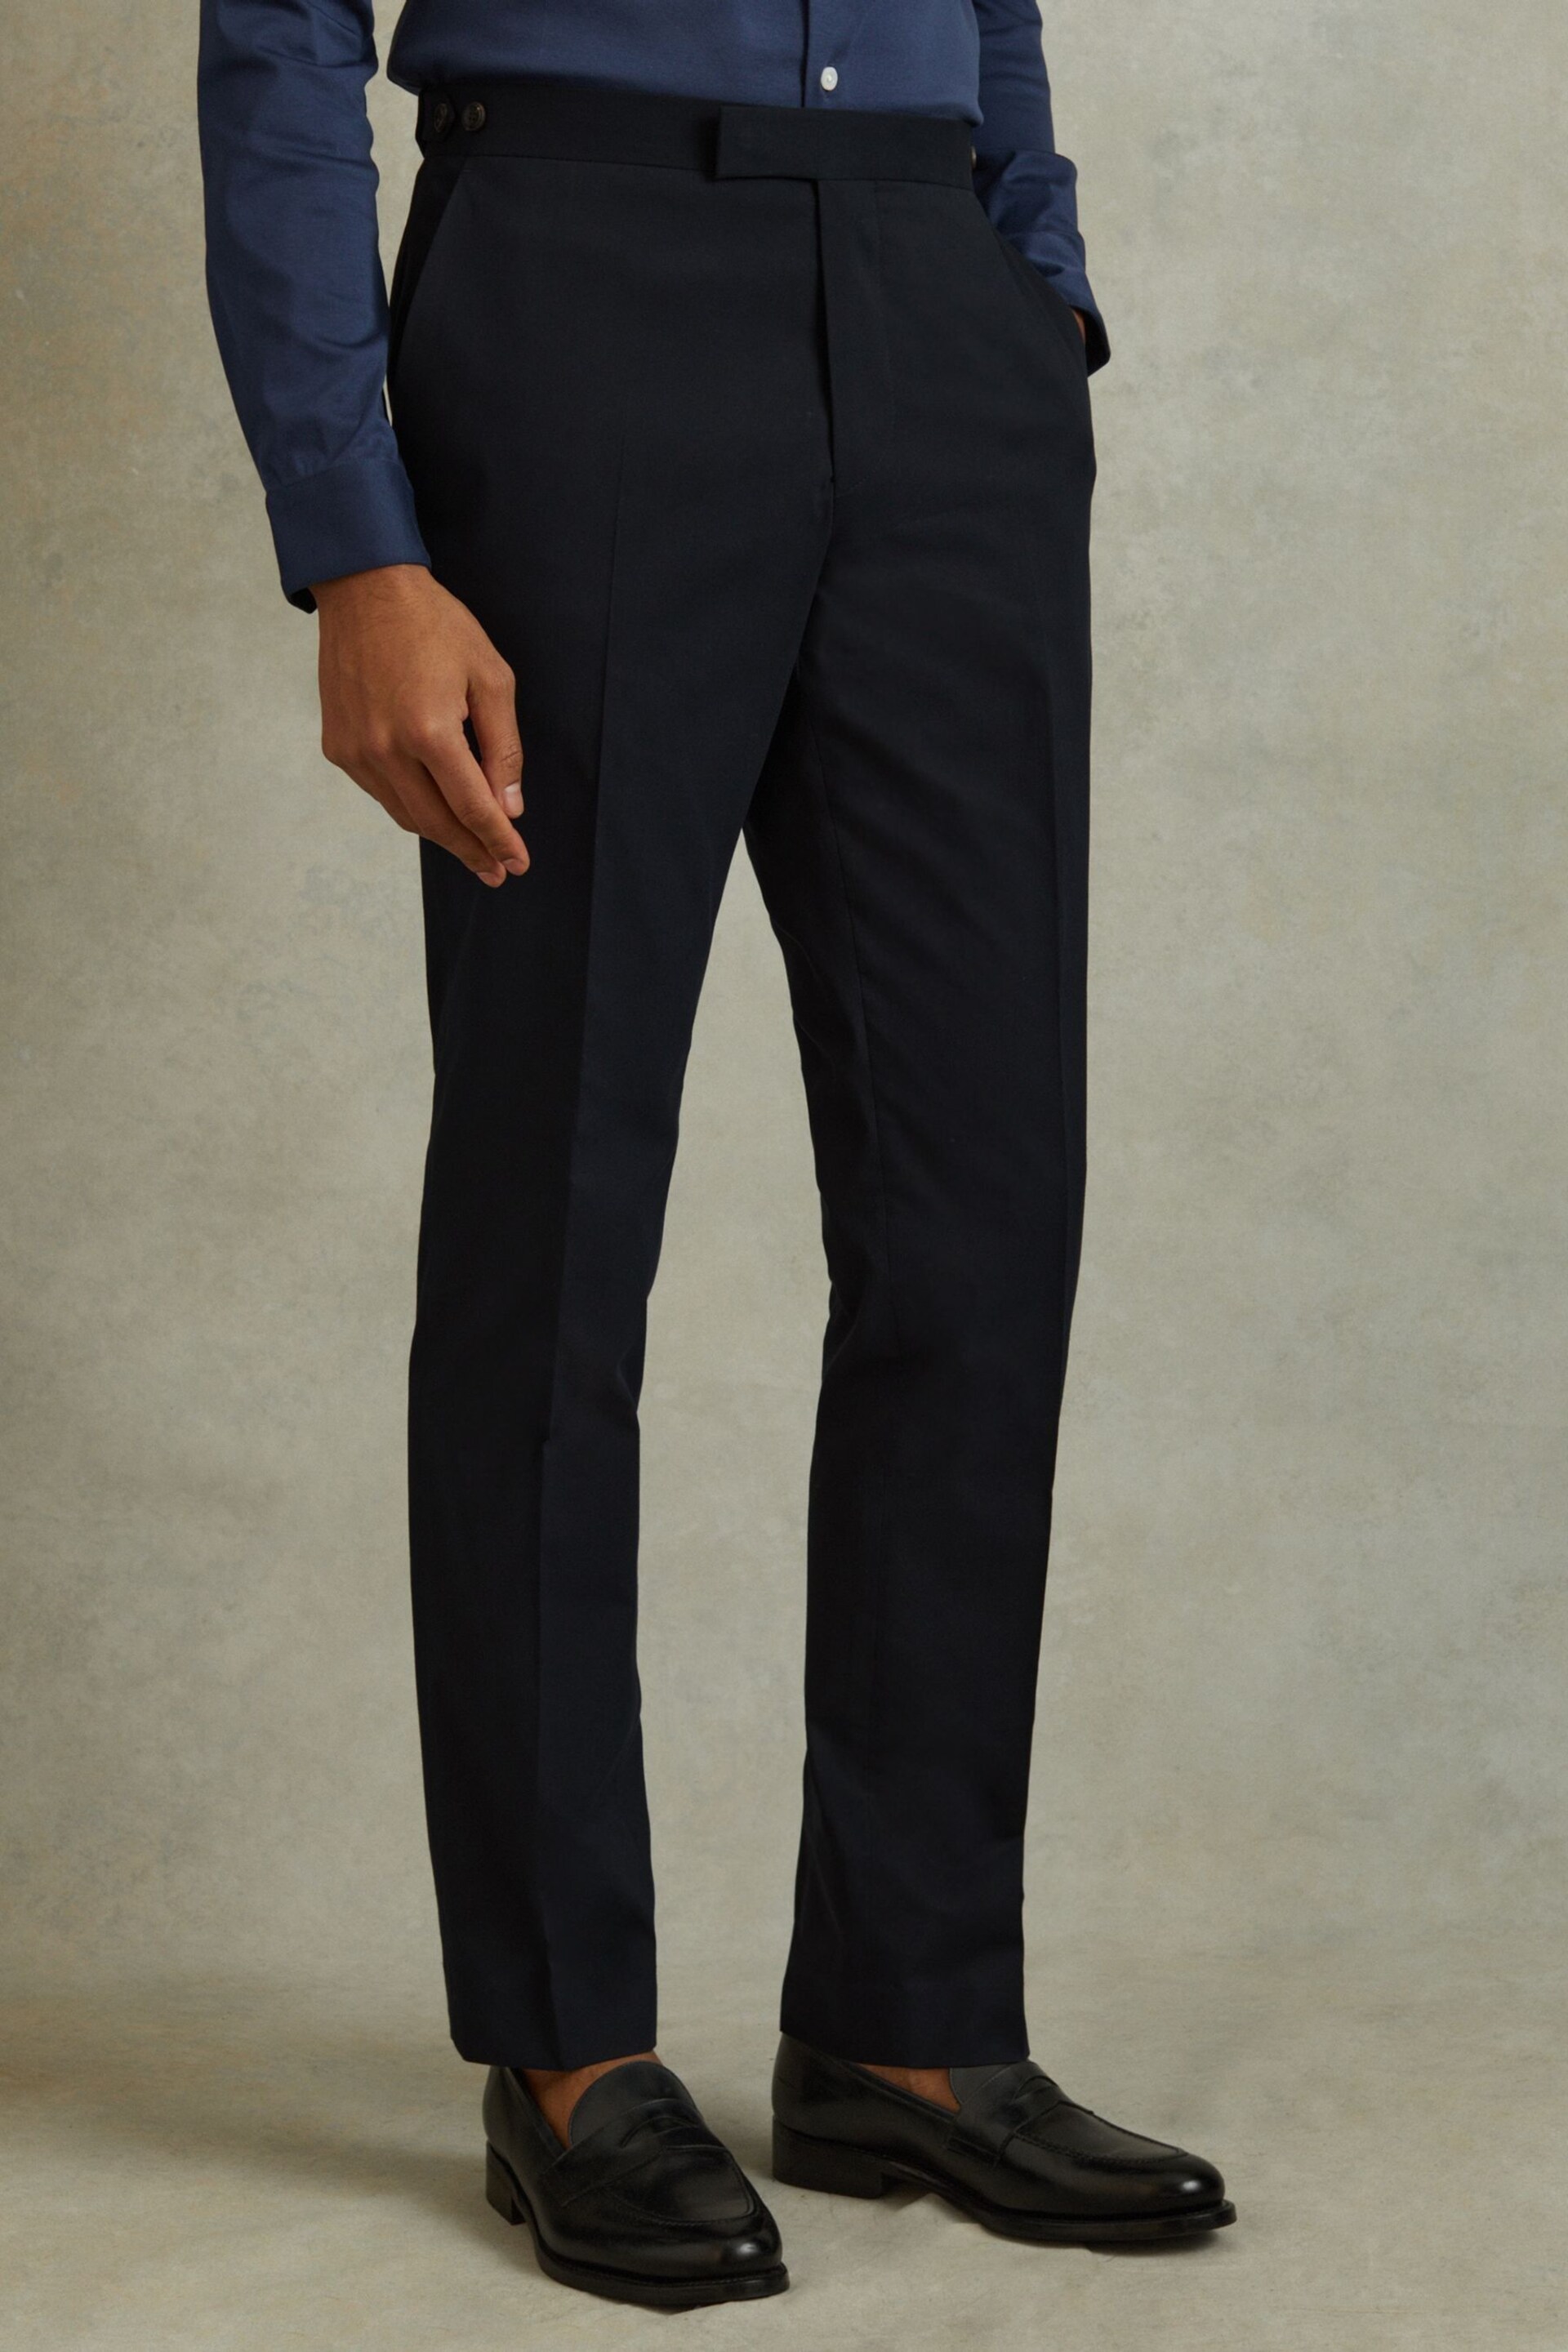 Reiss Navy Seare Cotton Blend Side Adjuster Trousers - Image 3 of 5